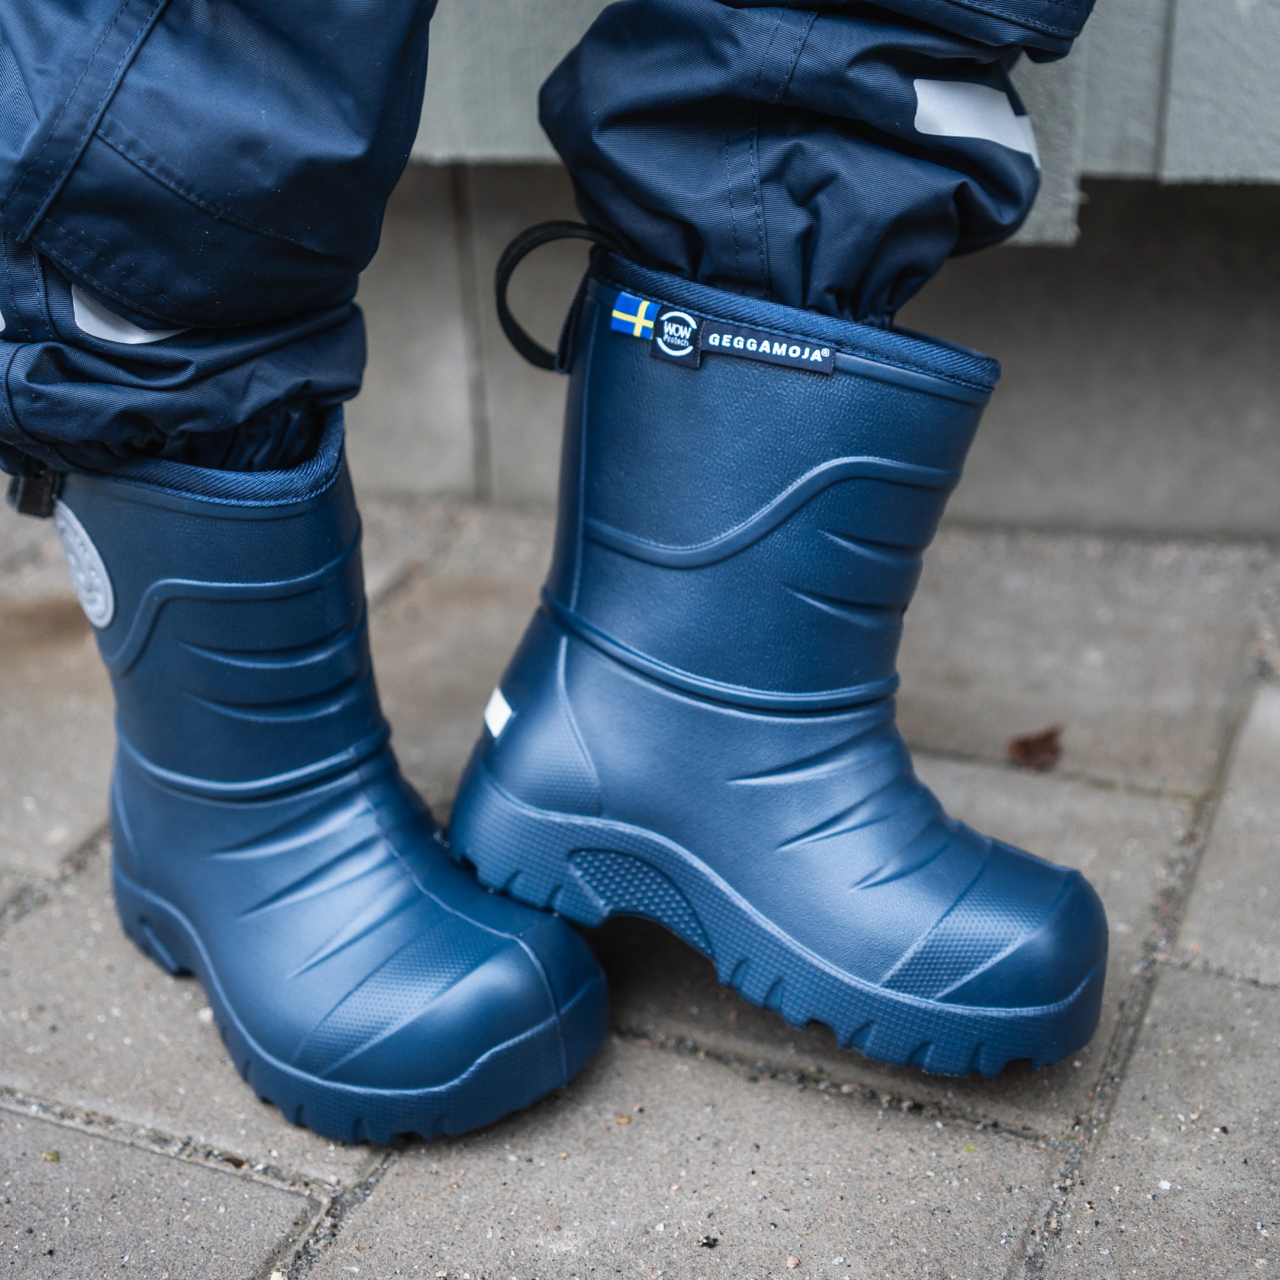 All-weather Boot Navy  31